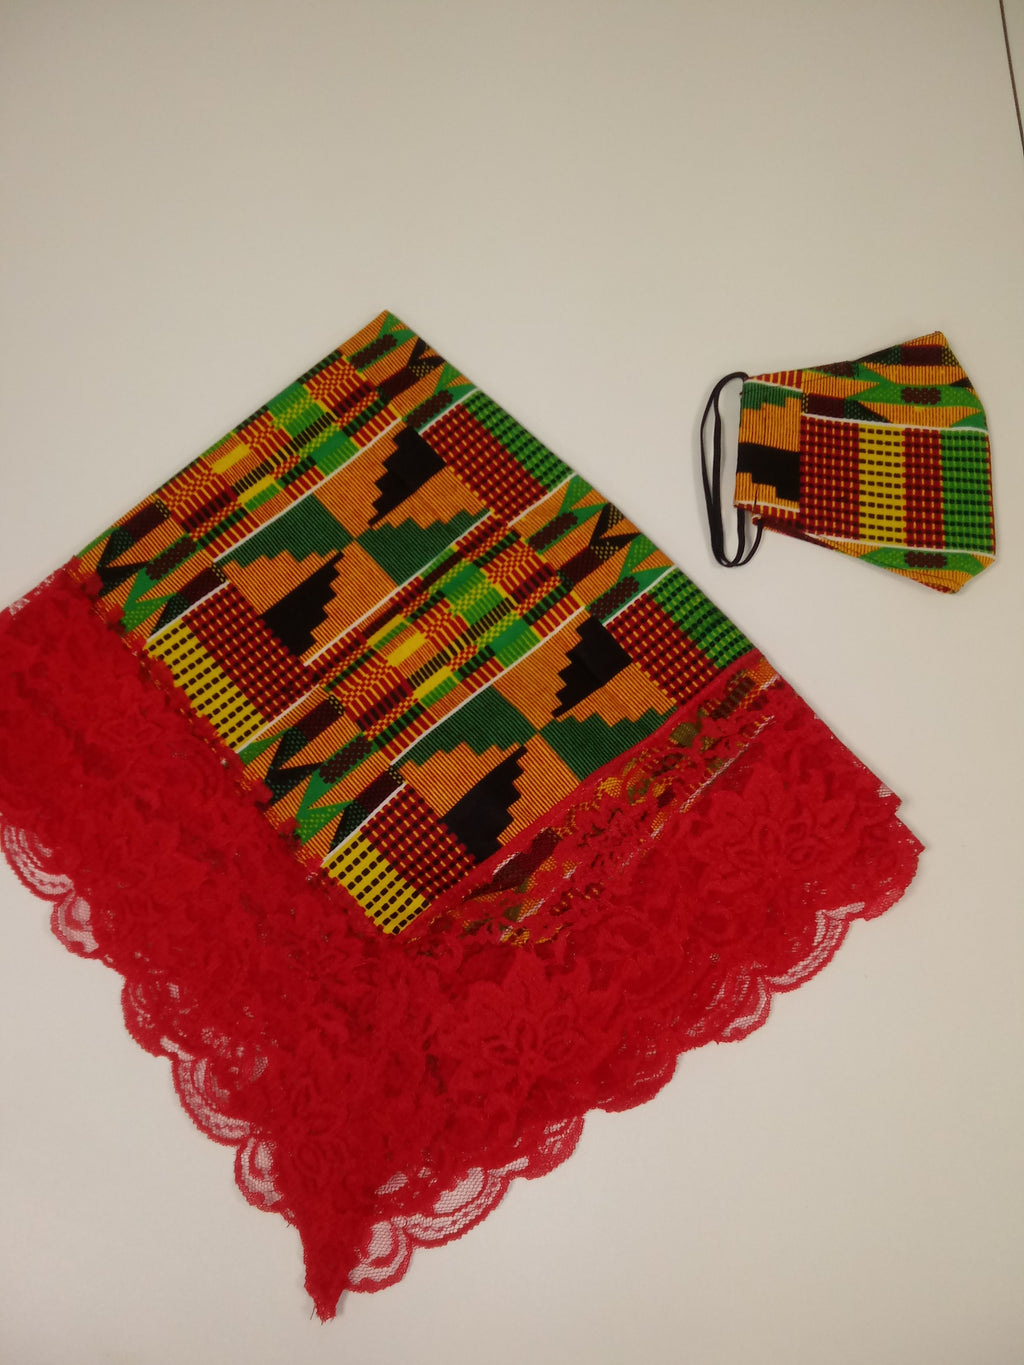 African Pride Church Collection "Mask and Lap Scarf "